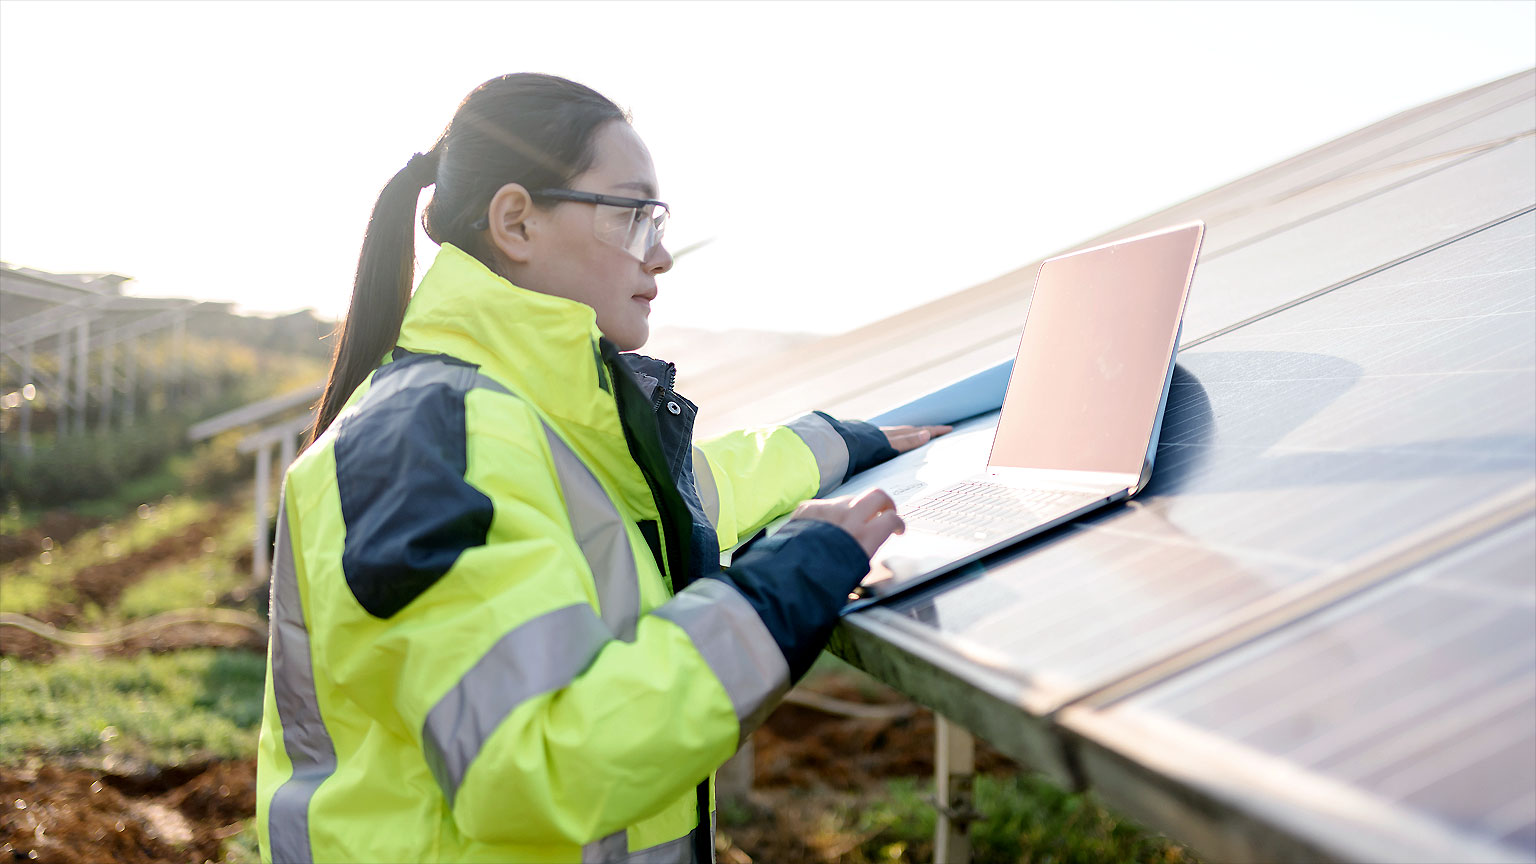 McKinsey's new Sustainability Academy helps clients upskill workers for the net-zero transition